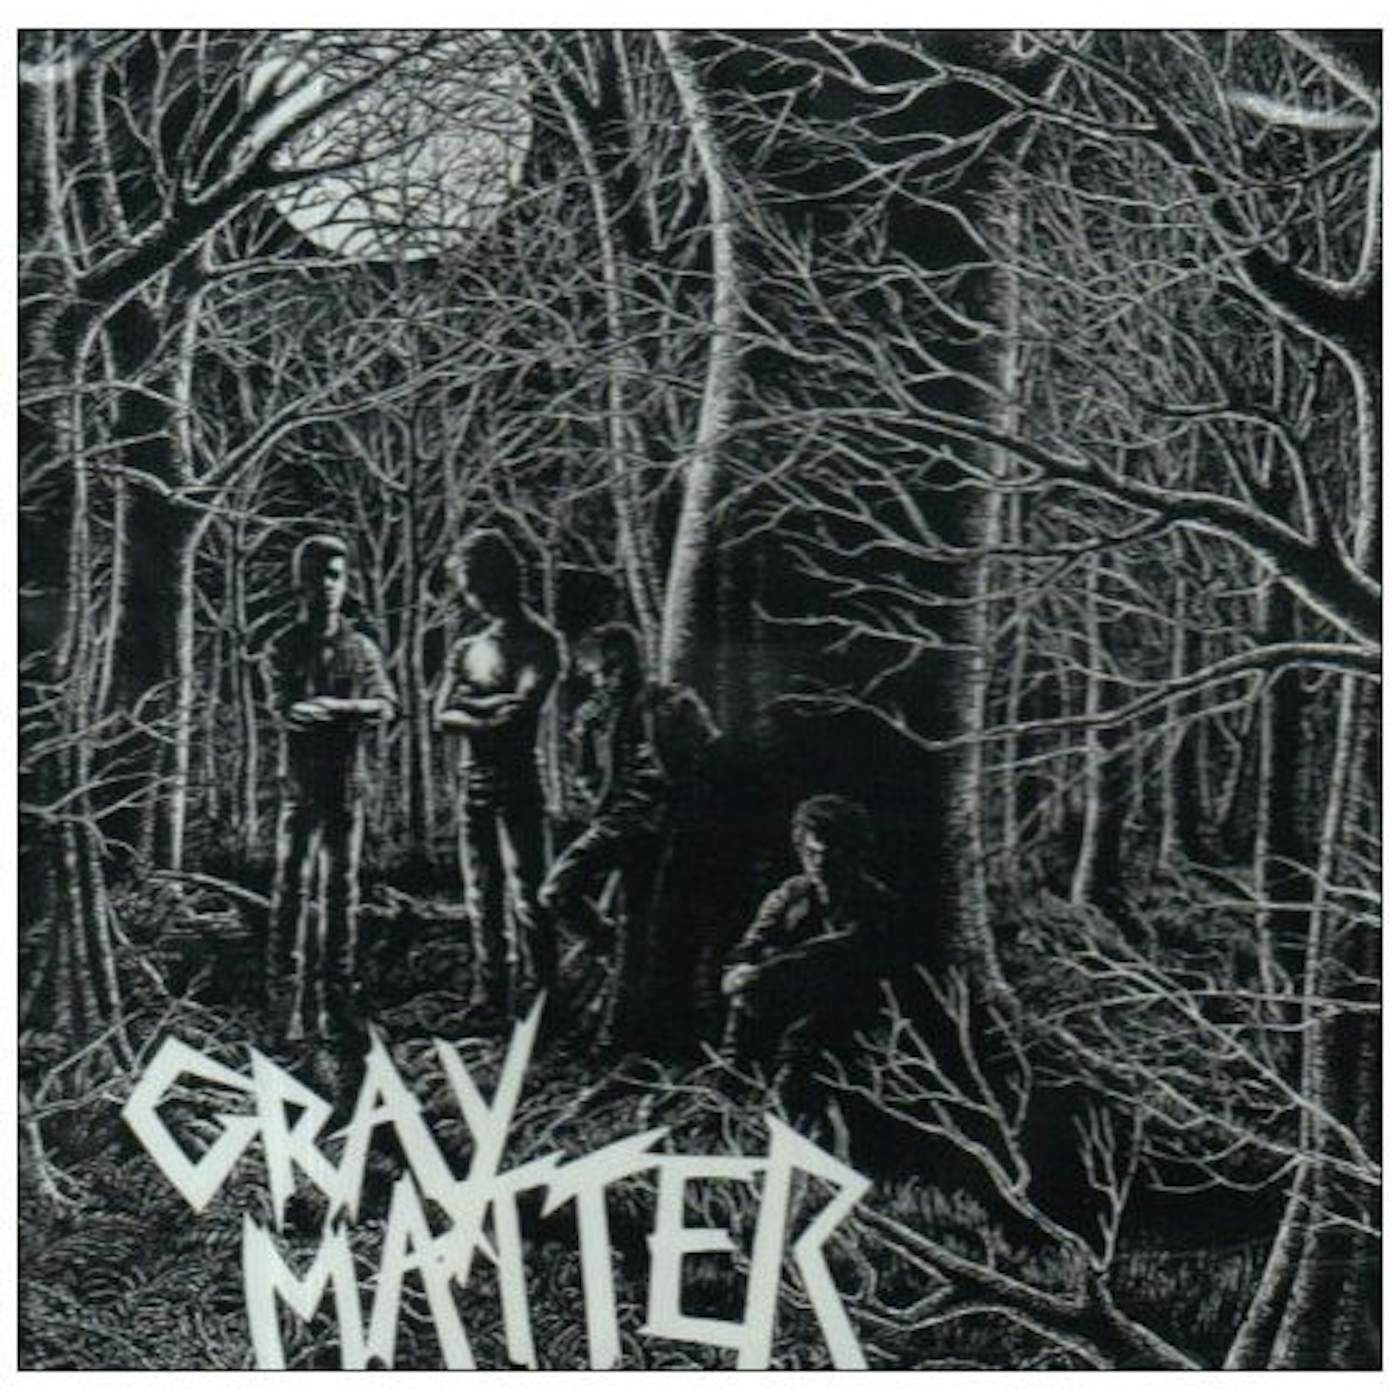 Gray Matter FOOD FOR THOUGHT / TAKE IT BACK CD